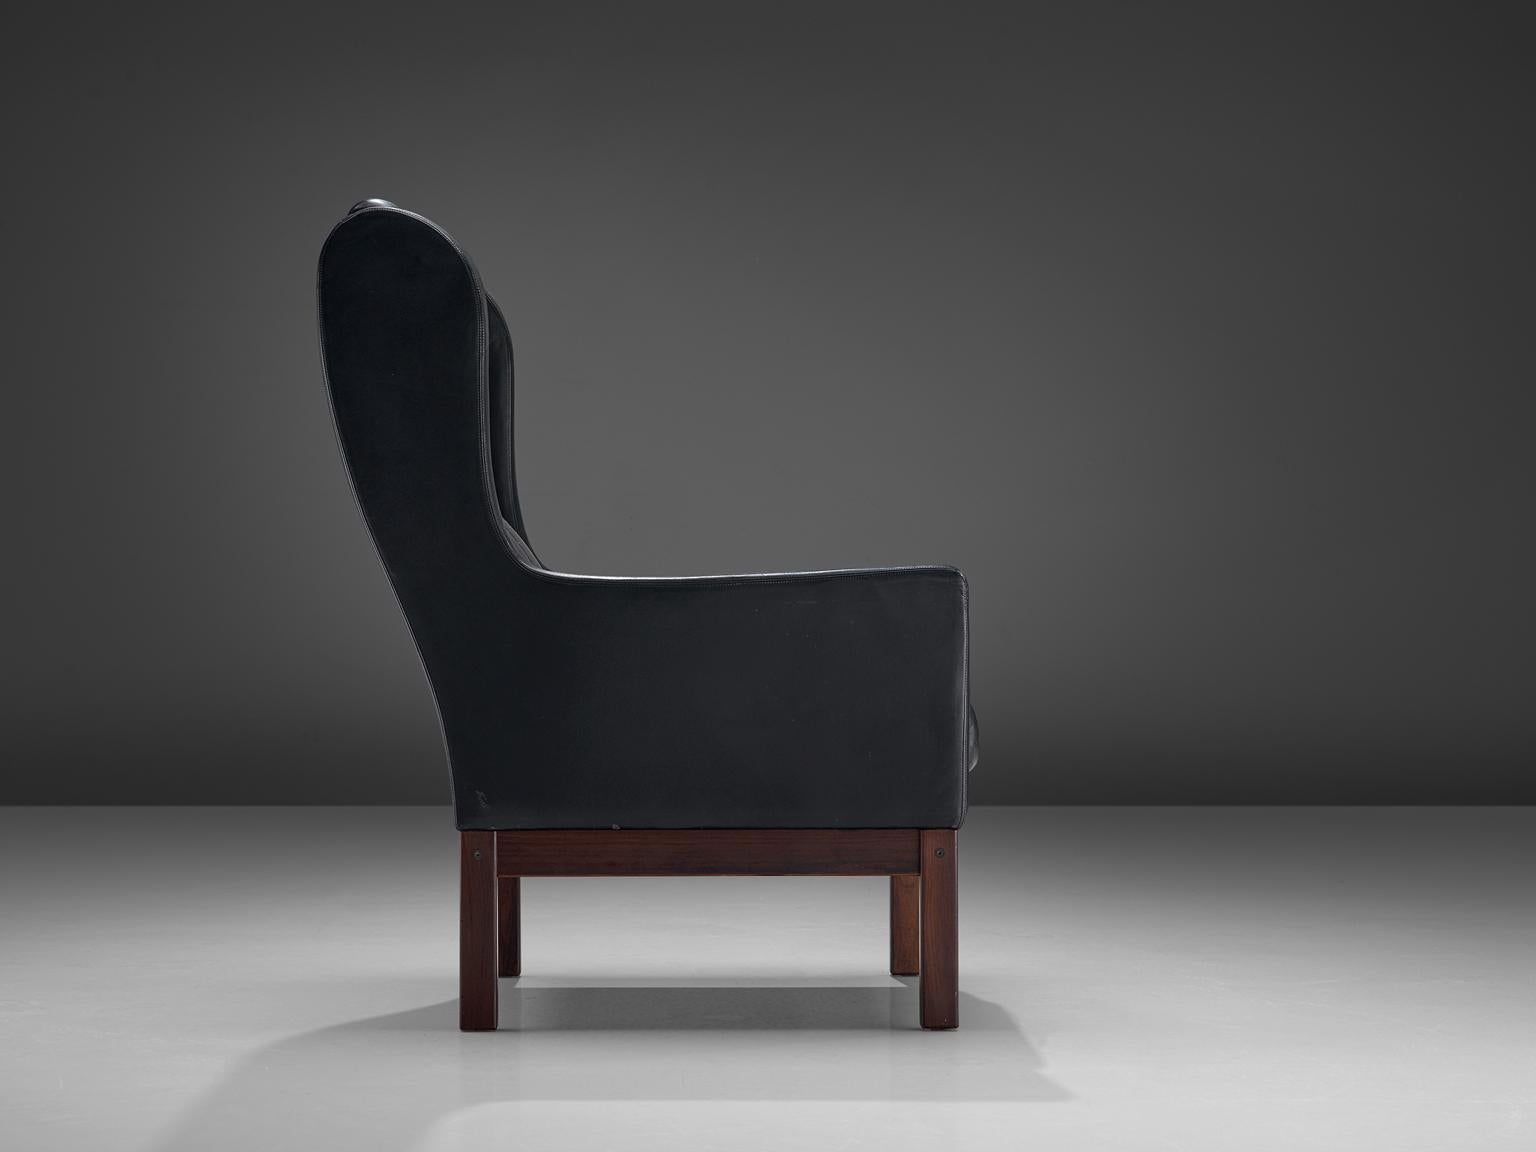 Pastoe, high back chair, leather and rosewood, Denmark, 1960s

Classic and decent lounge chair manufactured by Pastoe in the 1960s. The rosewood frame holds a black leather buttoned body. The chair features a well balanced design, showing strong